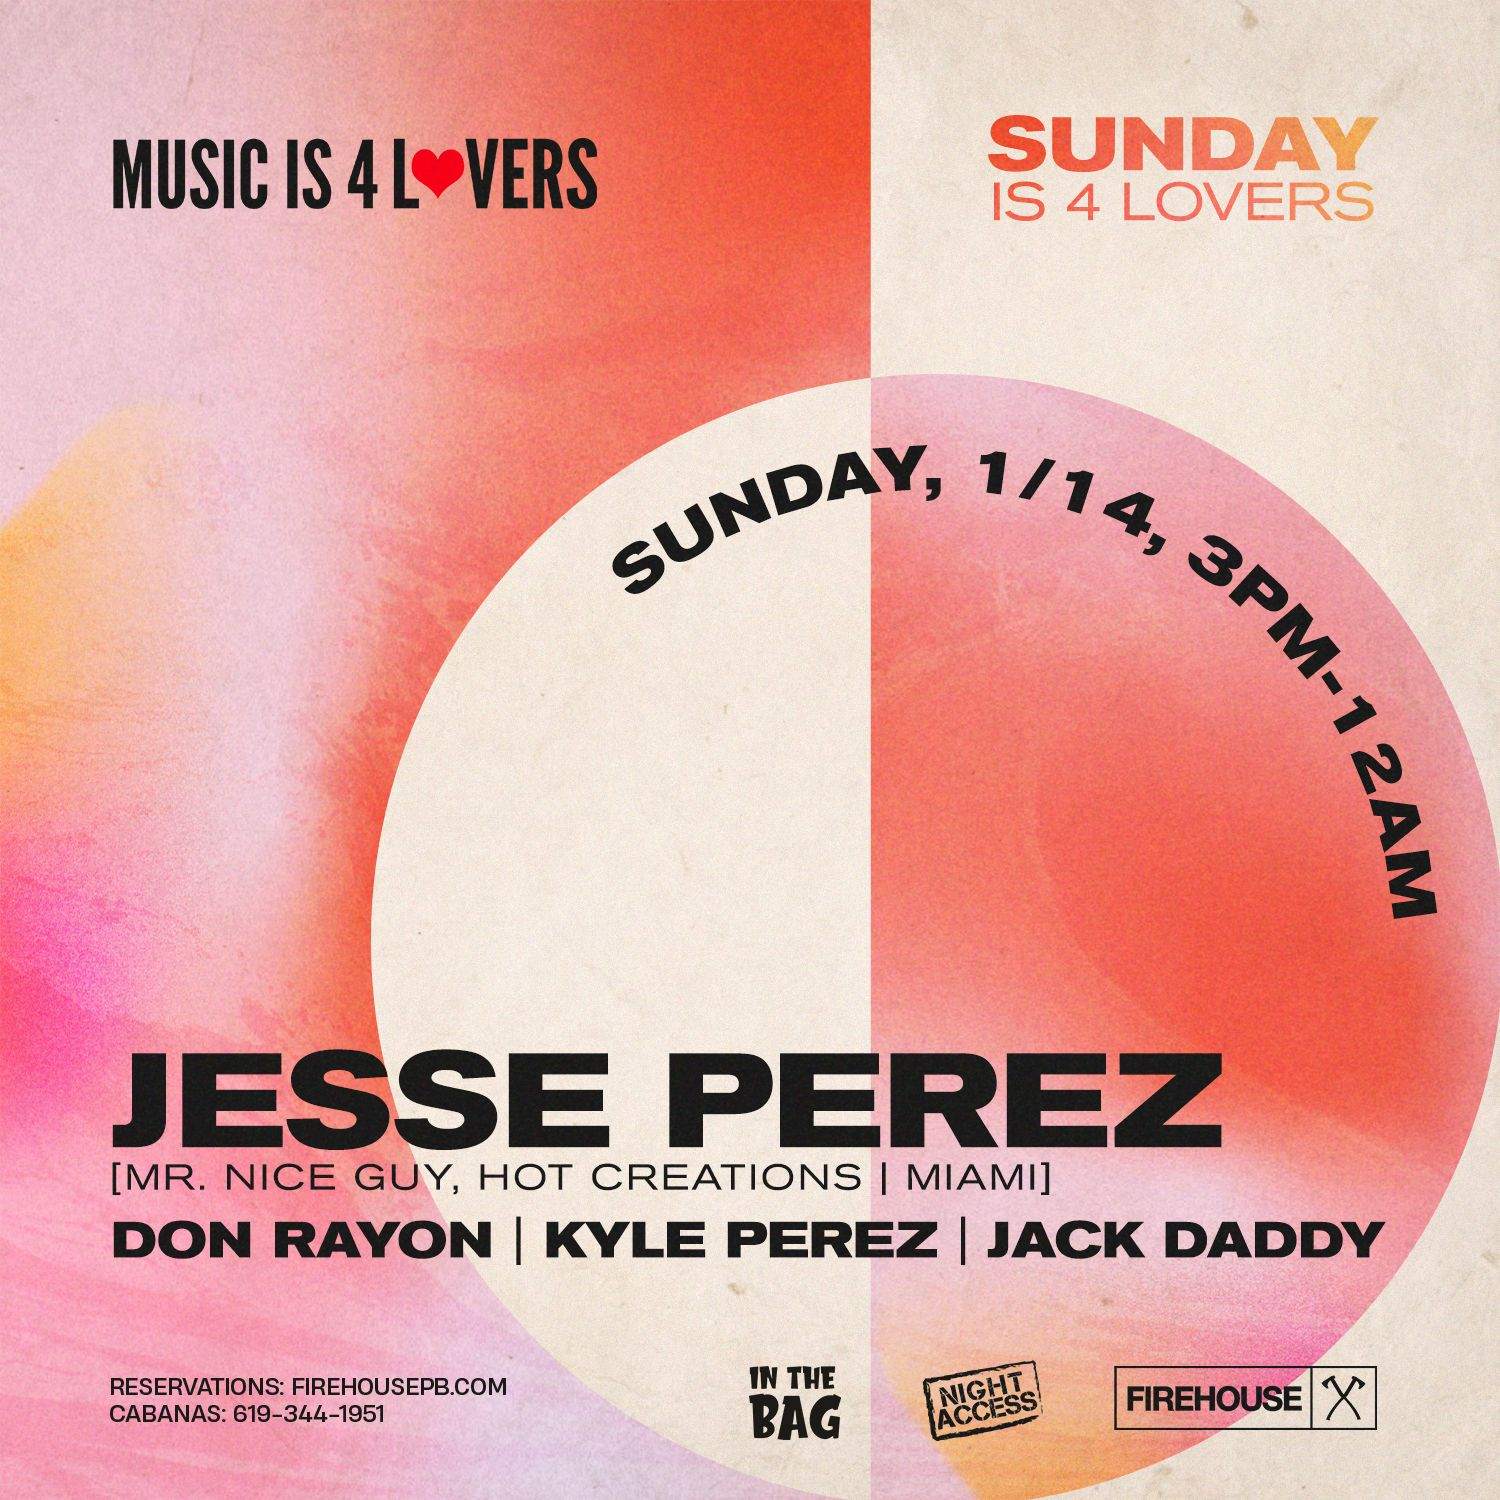 Jesse Perez [MR. NICE GUY, HOT CREATION - MIAMI] at FIREHOUSE - NO COVER - フライヤー表